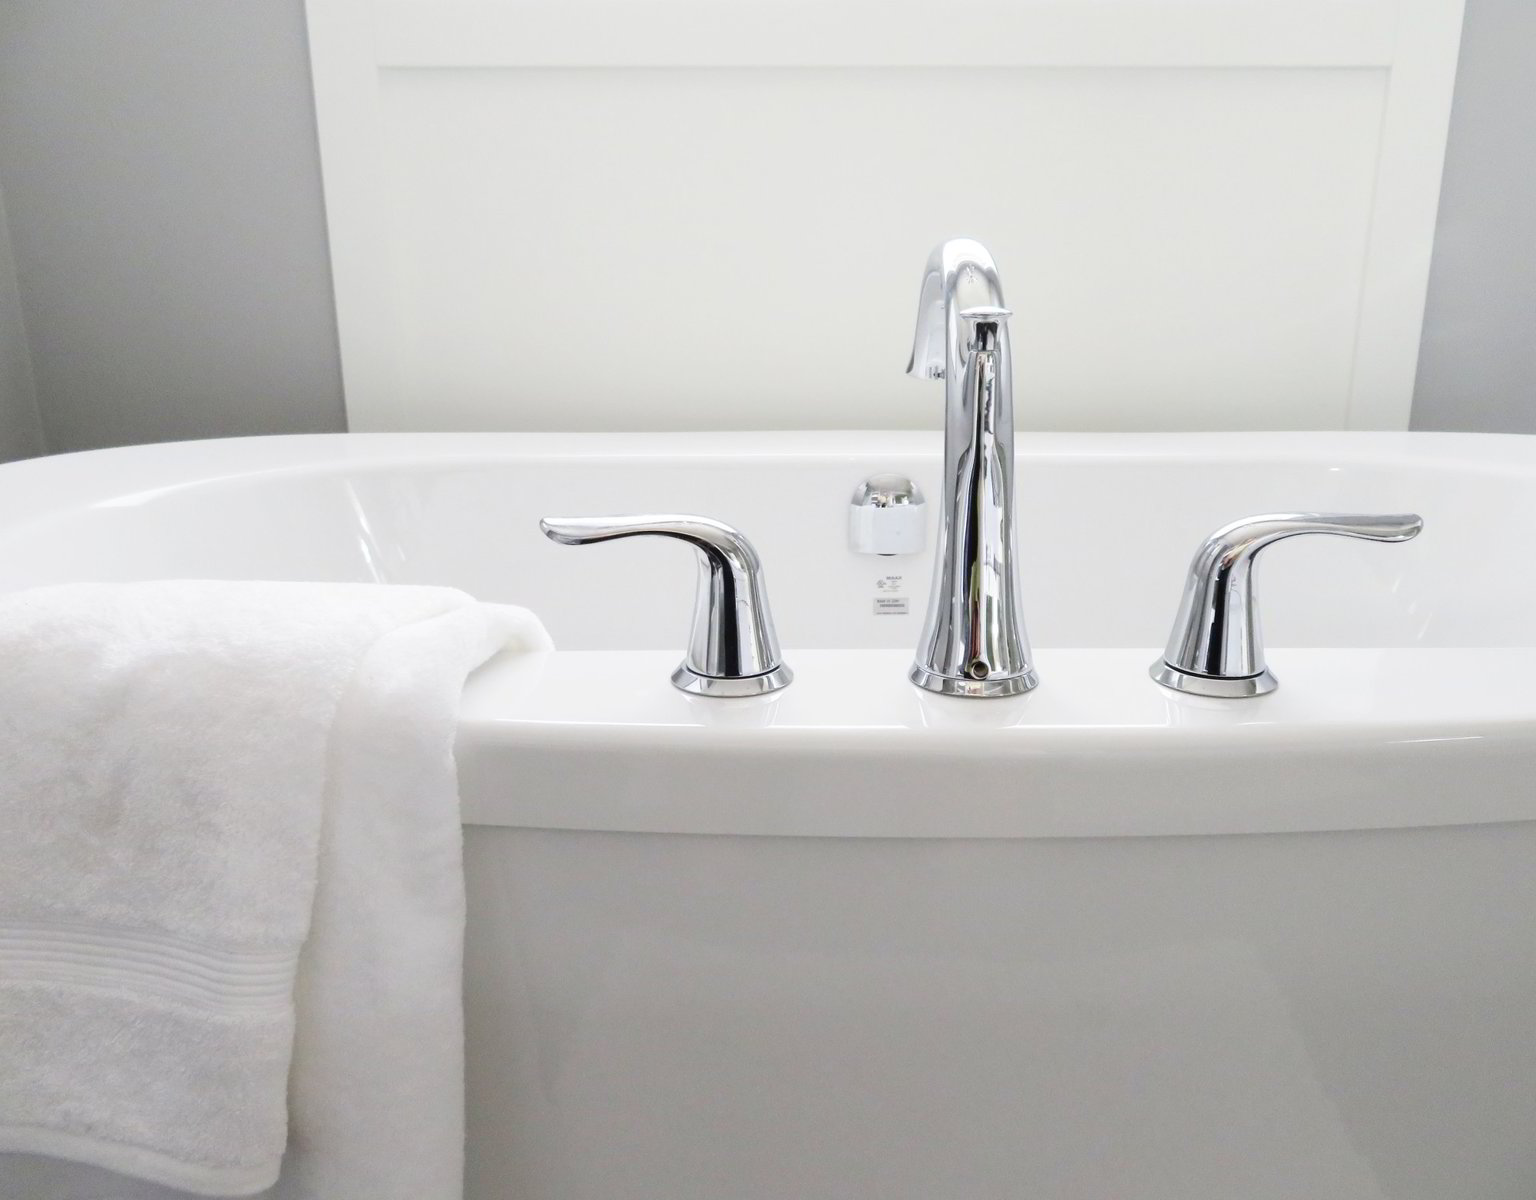 How To Fix A Leaky Bathtub Faucet, How To Repair A Leaky Bathtub Faucet